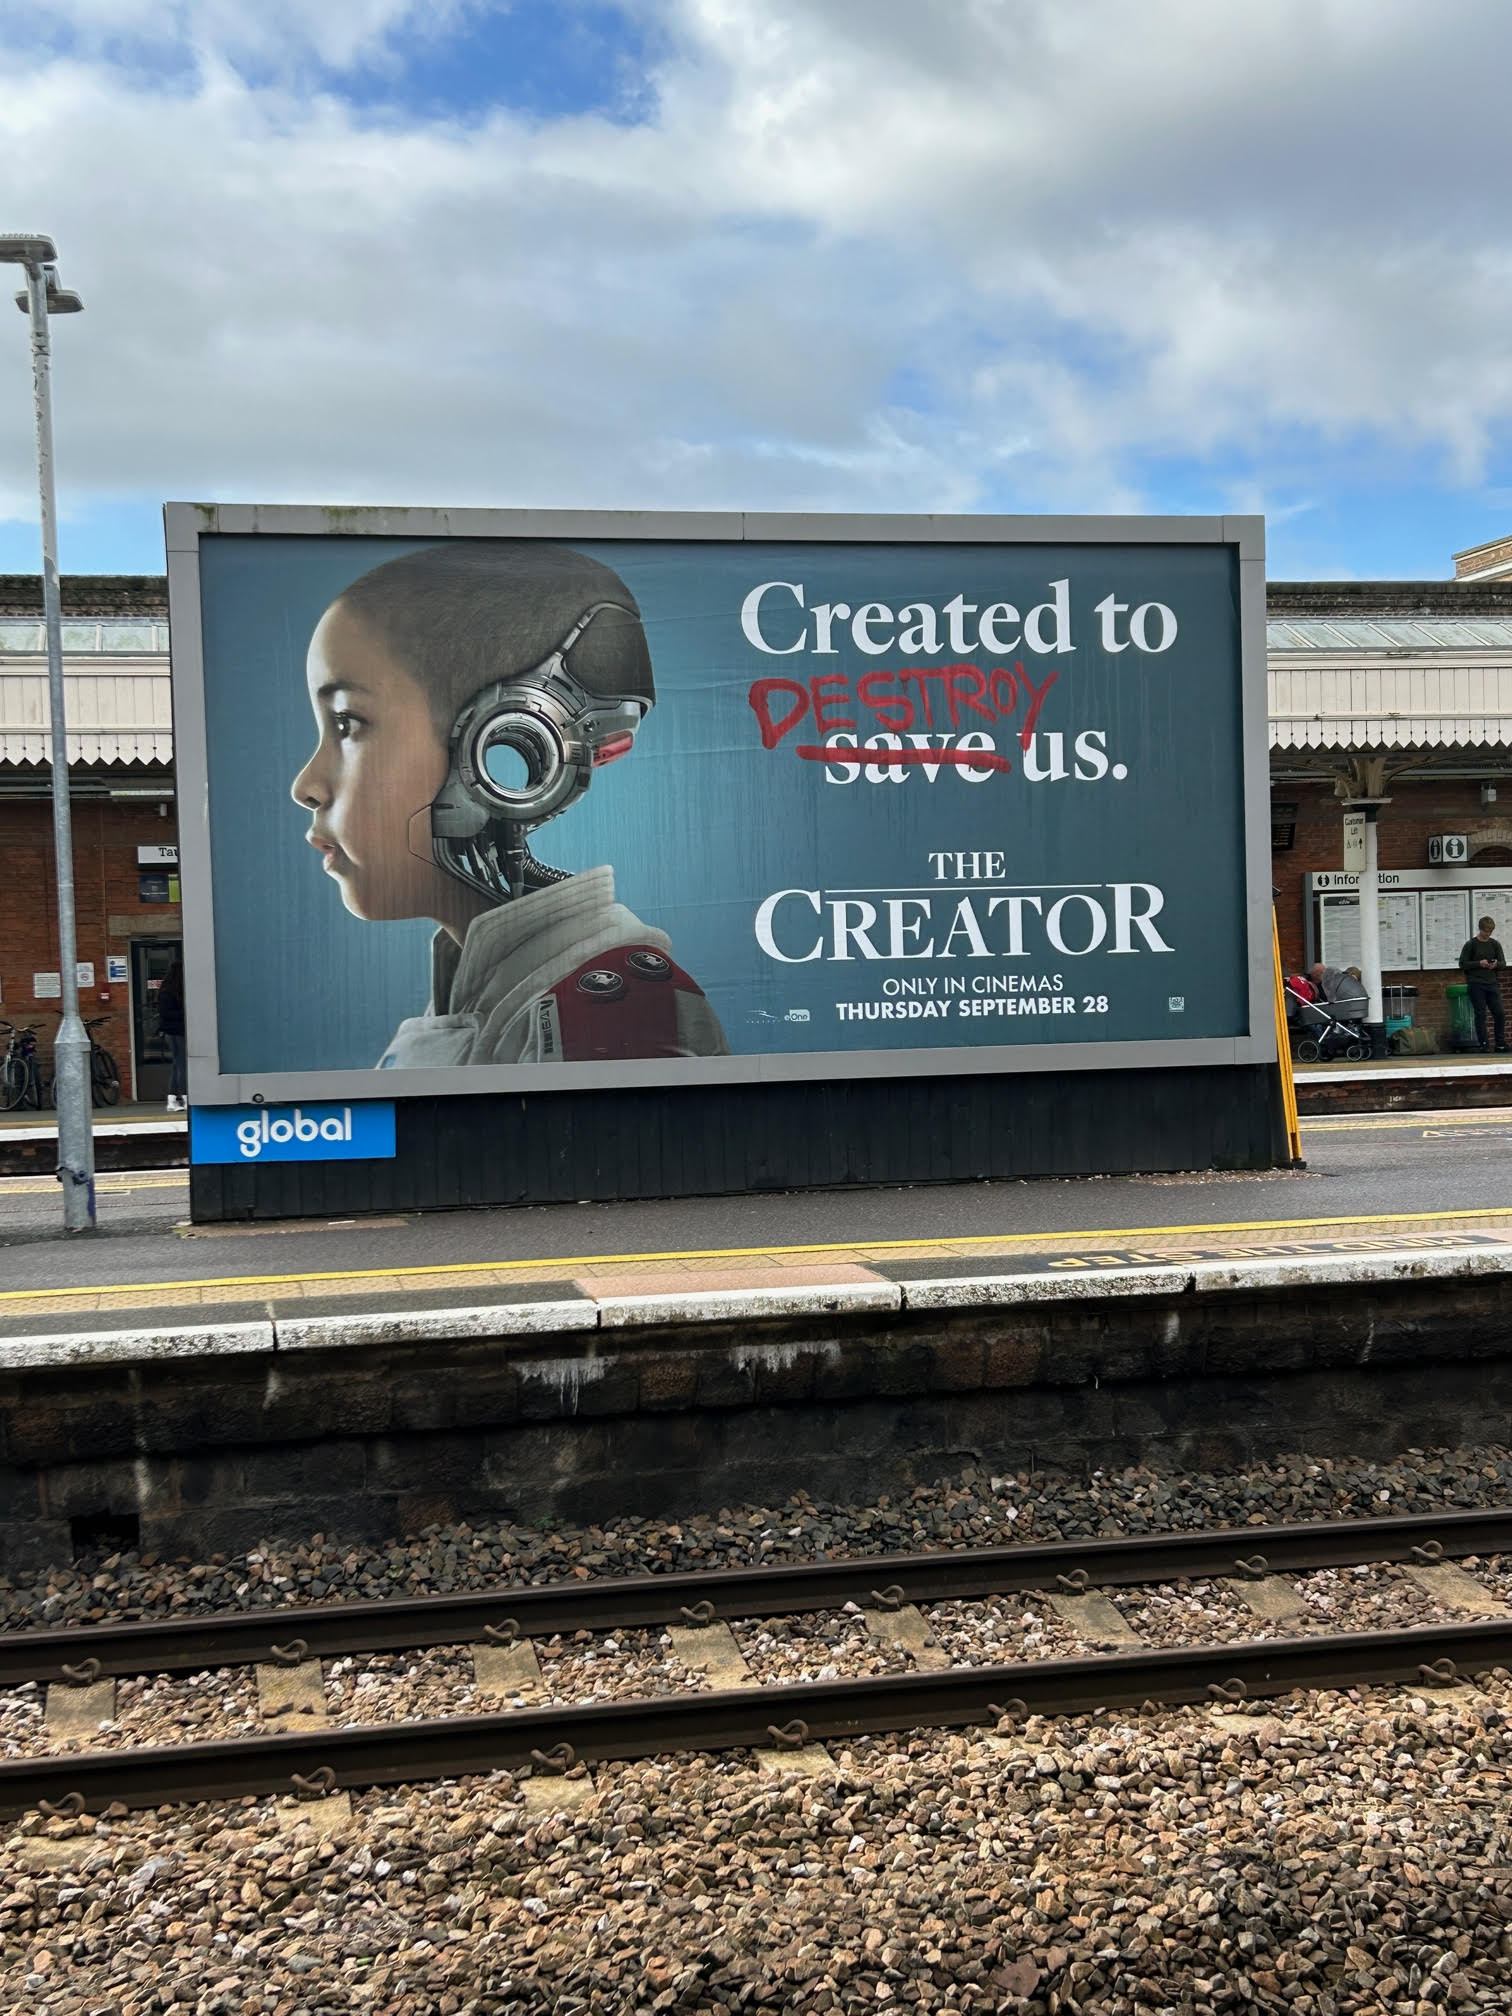 Image of film poster with an image of a human face with a robotic head and text that reads "created to save us" but the word save is crossed out in blood and replaced with "destroy".